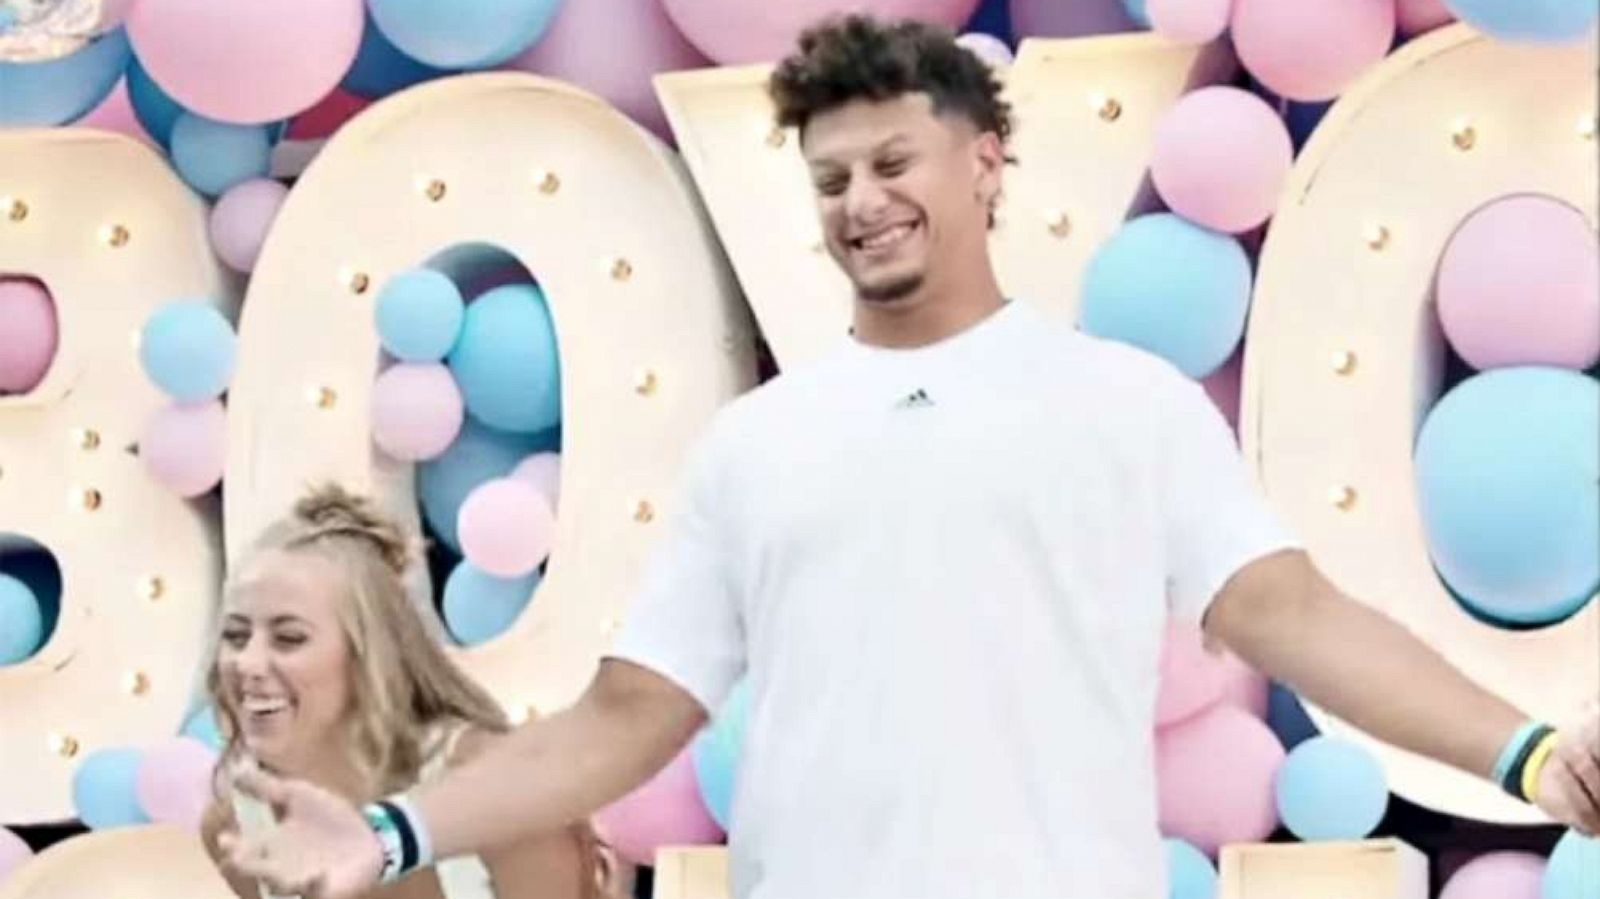 Island Wedding Inspiration from the Chief's Patrick Mahomes and Brittany  Matthews